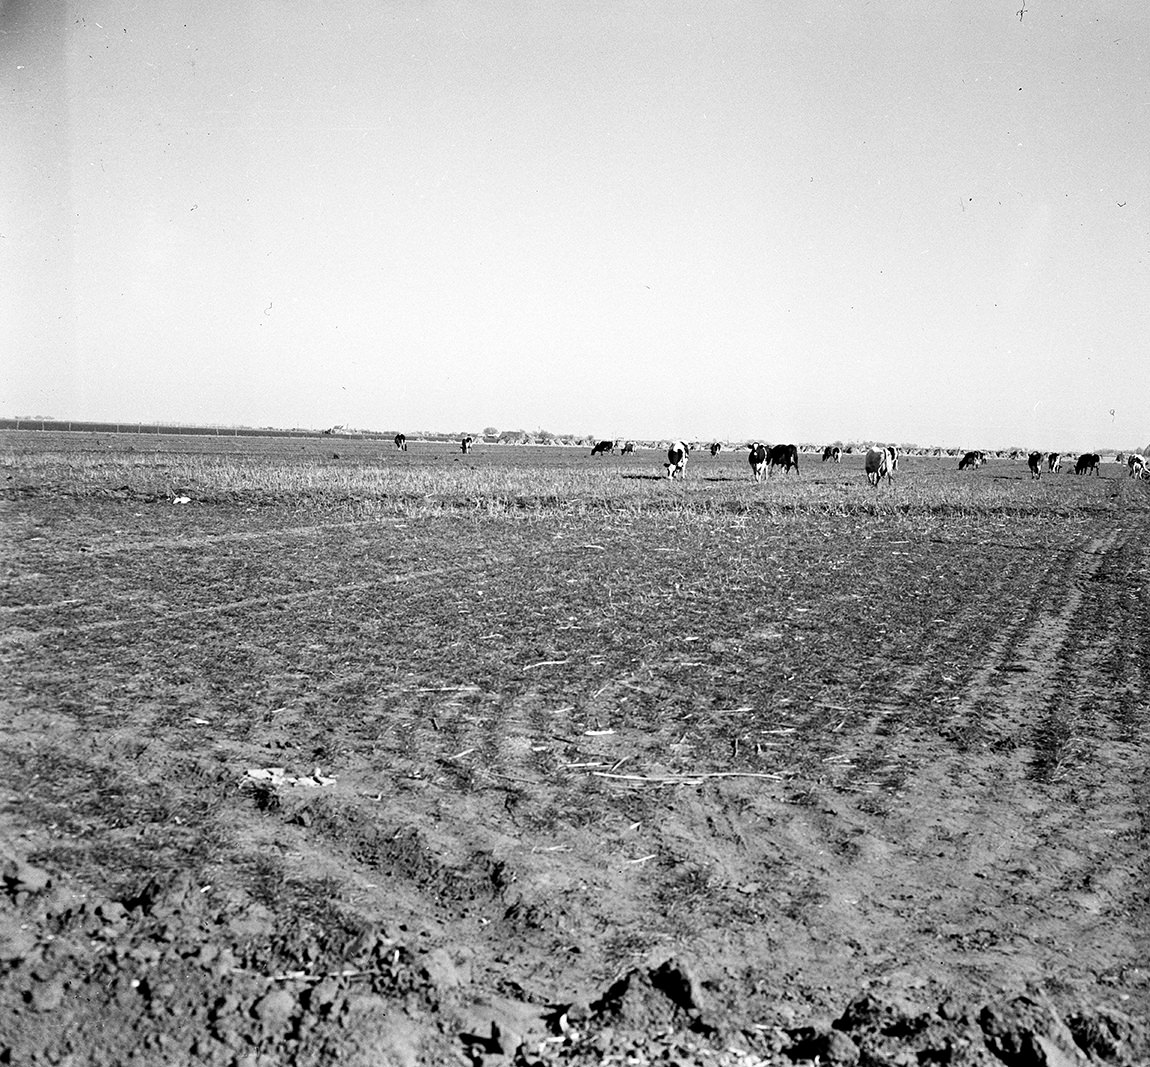 The Holstein cattle on the G. R. Fain farm near Plainview graze peacefully and contentedly on an irrigated pasture which Fain has put in to keep up his milk production, 1949